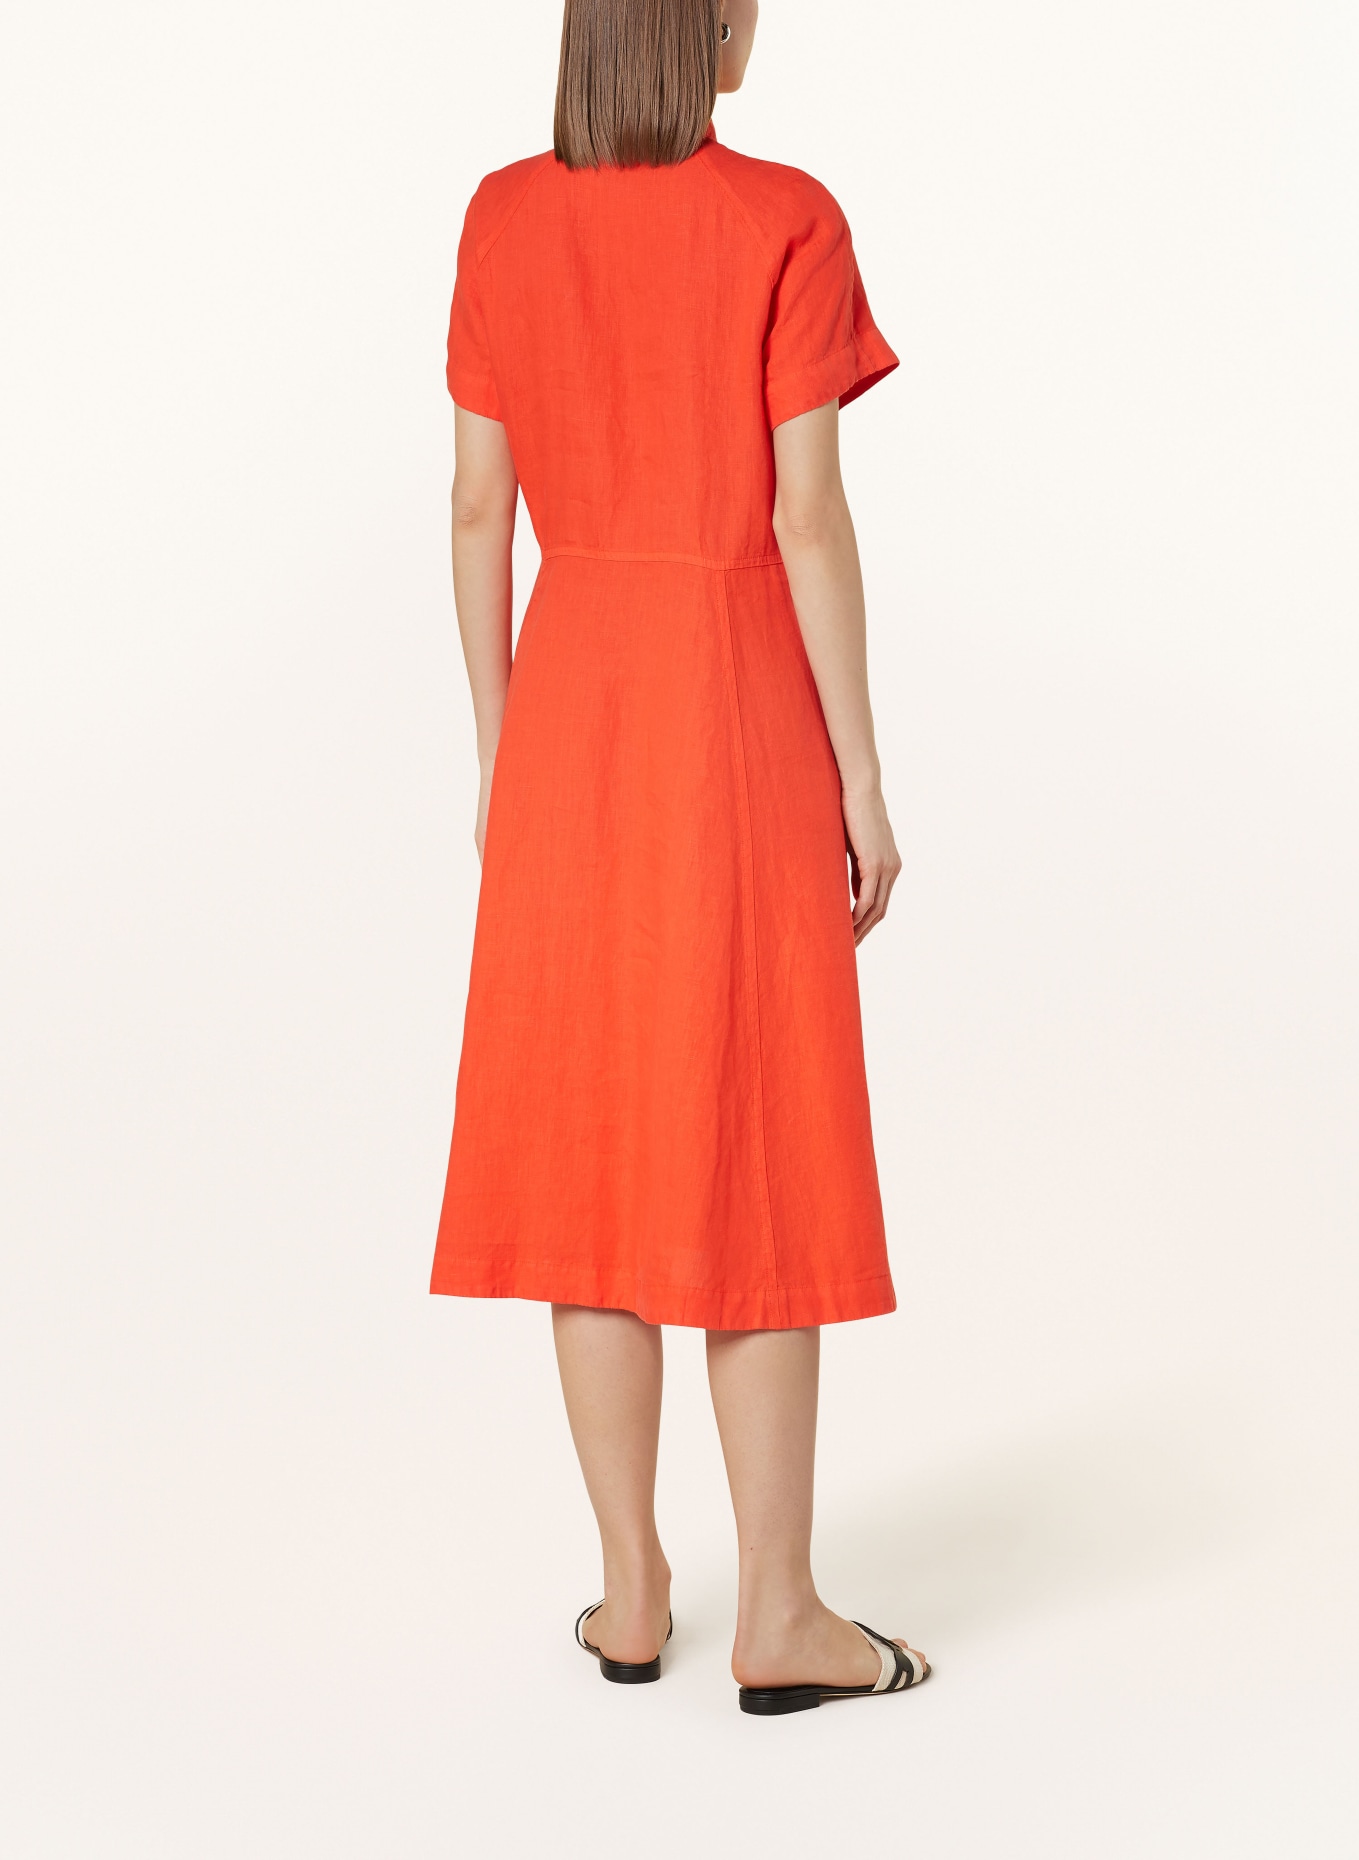 ROSSO35 Linen dress, Color: RED (Image 3)